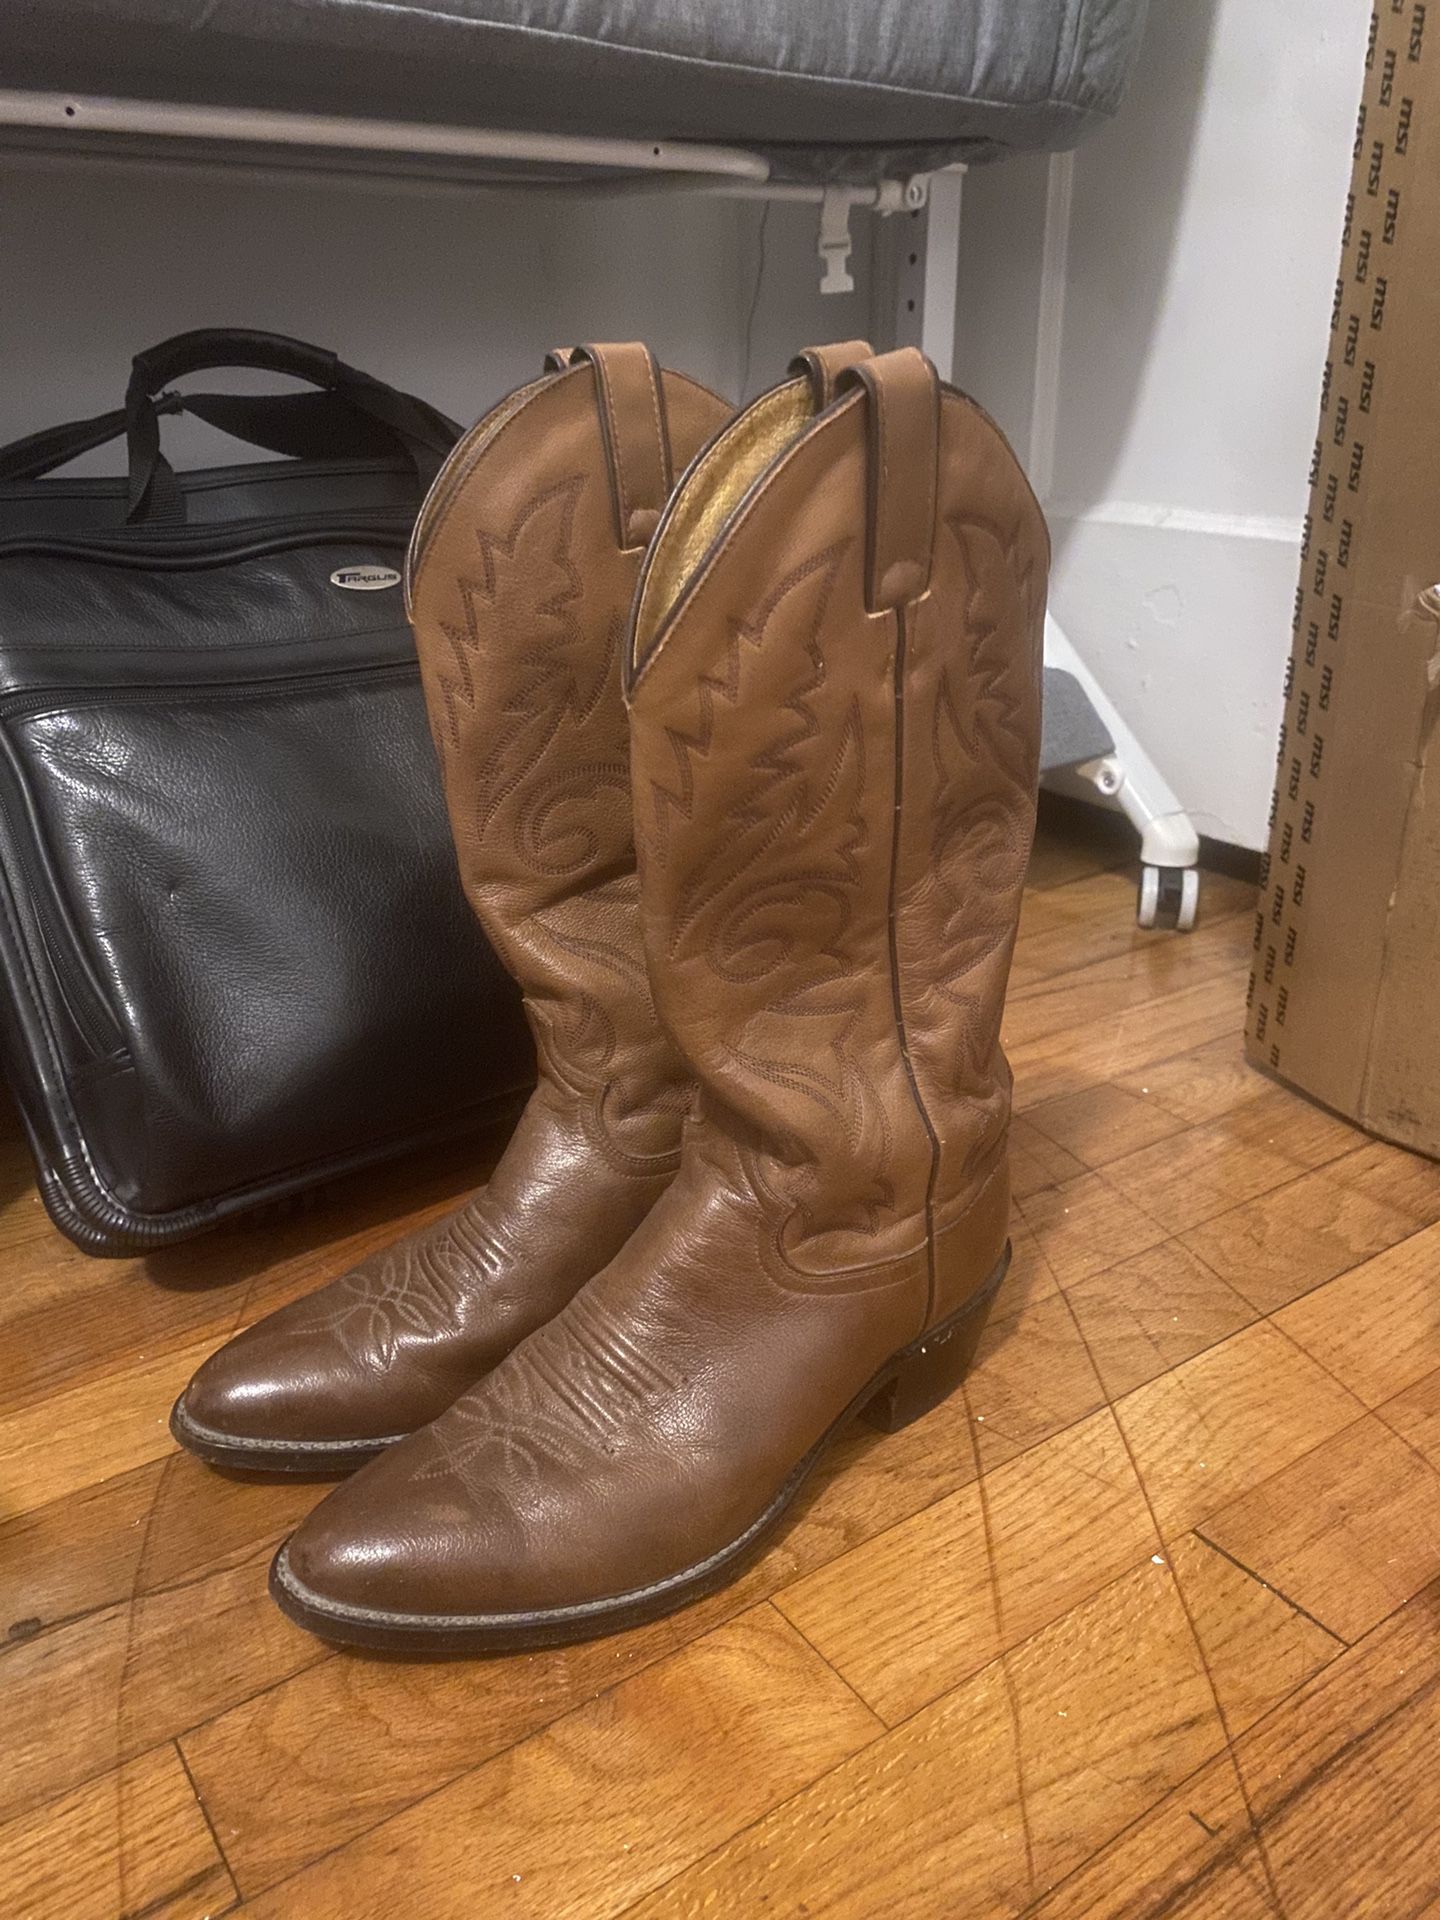 Genuine Leather Cowboy Boots Size 8 $30